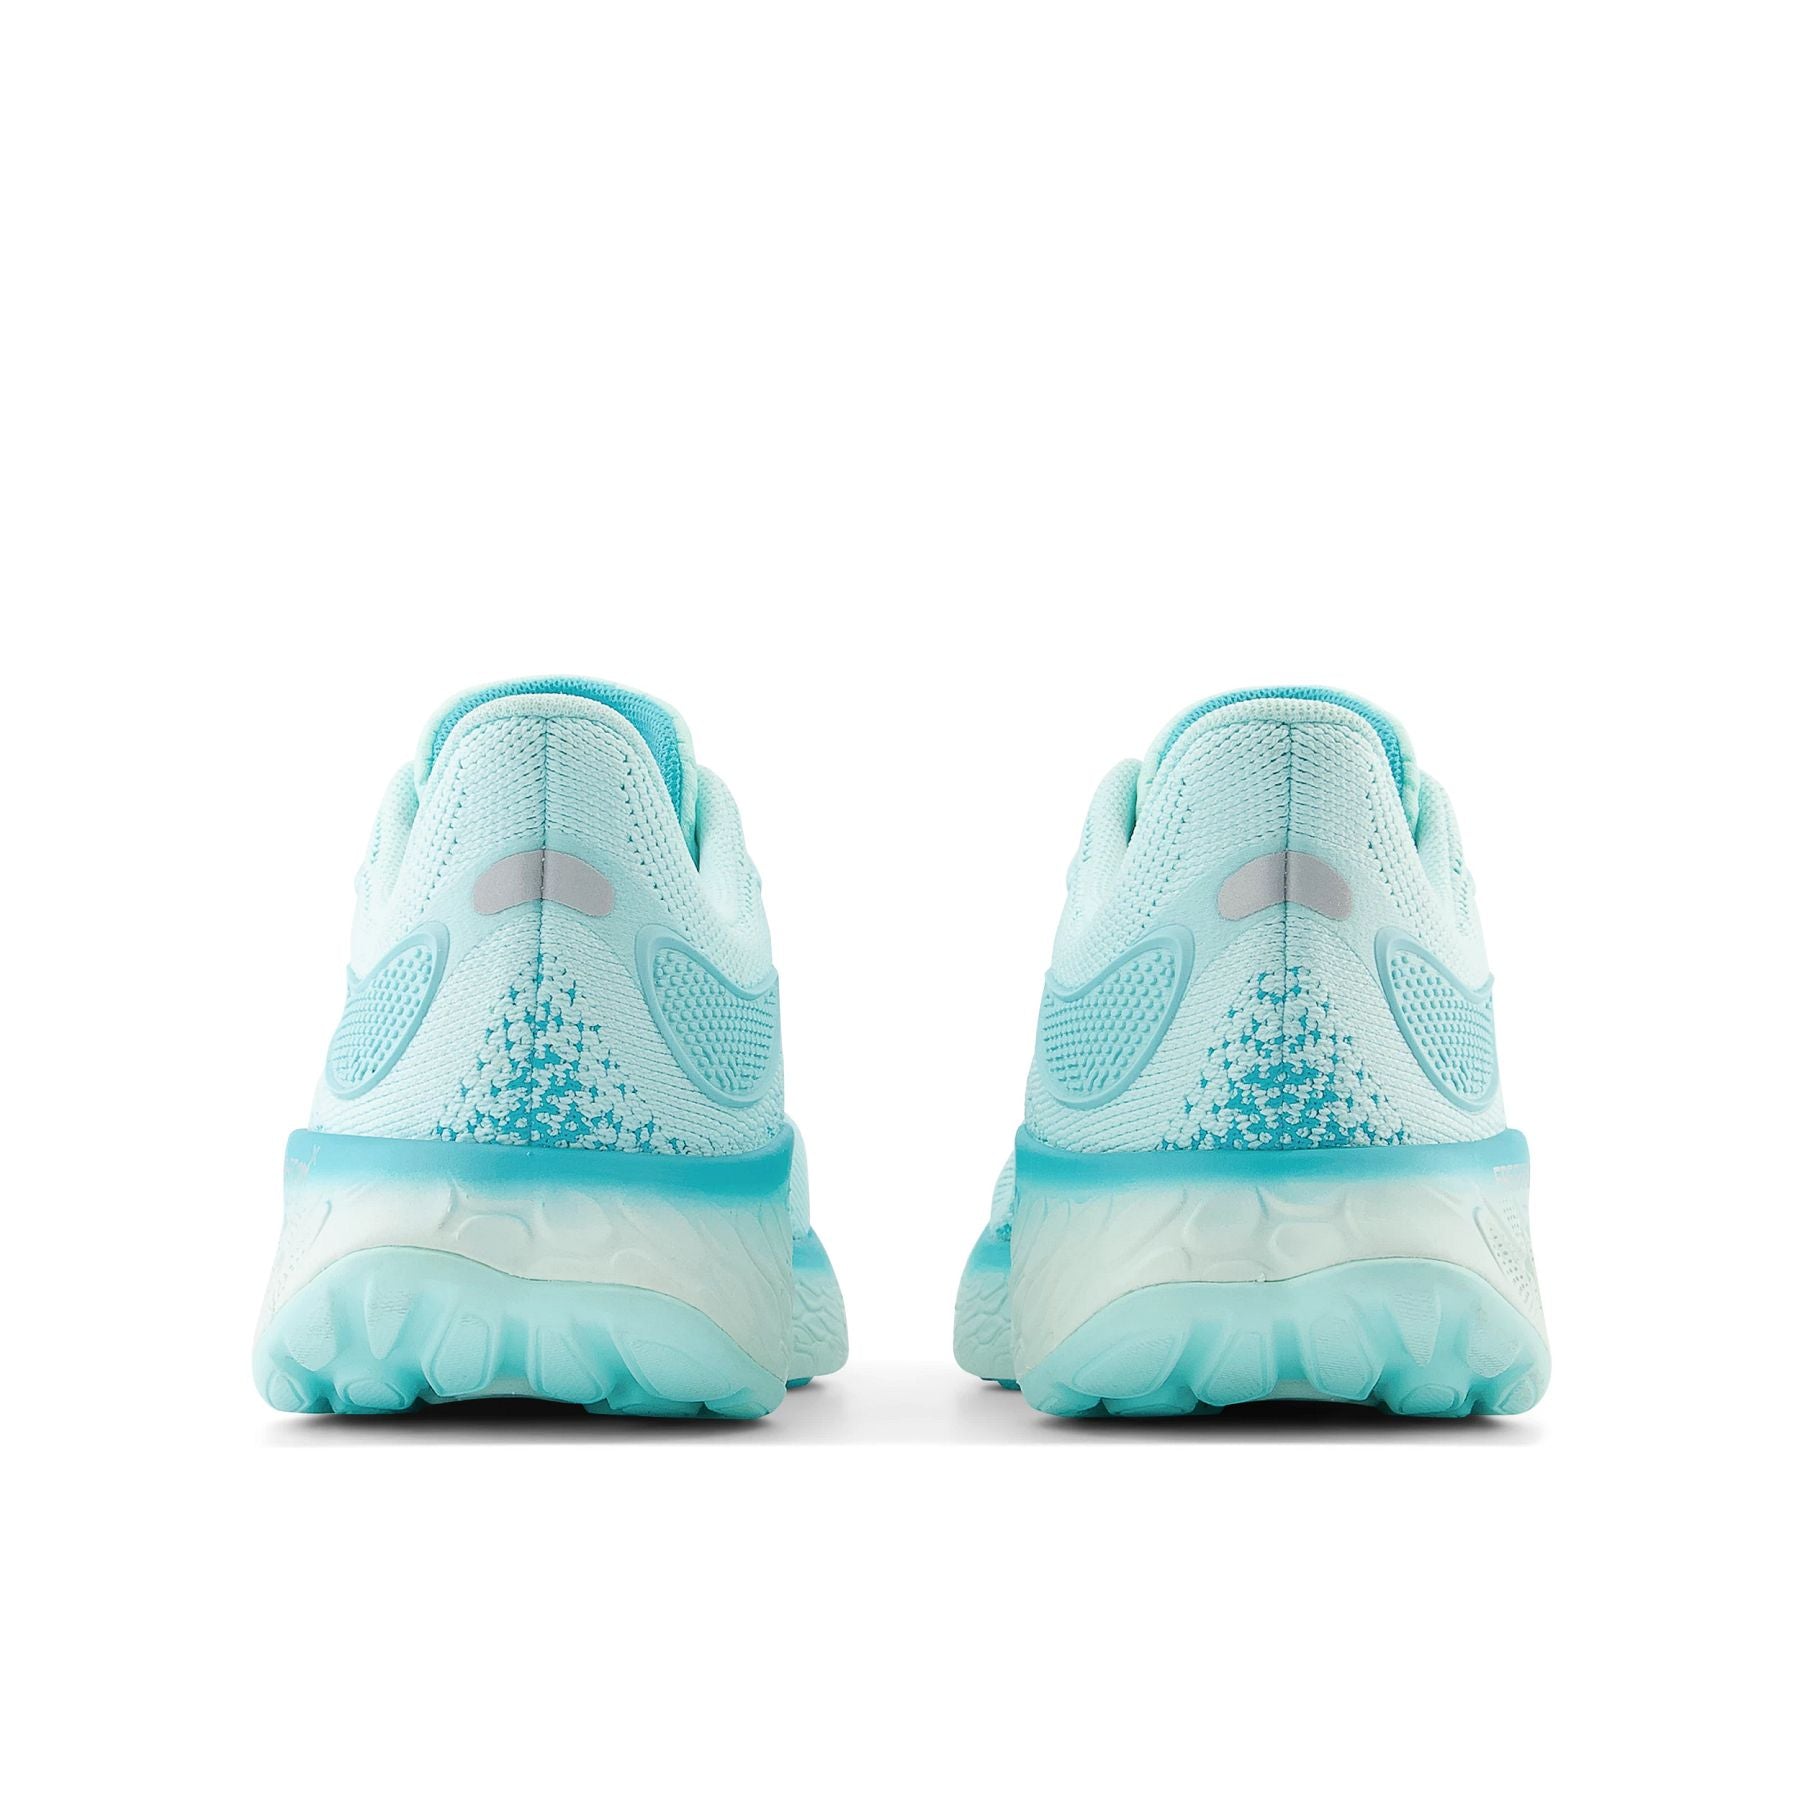 Back view of the Women's 1080 V12 by New Balance in the color Bright Cyan/Virtual Blue